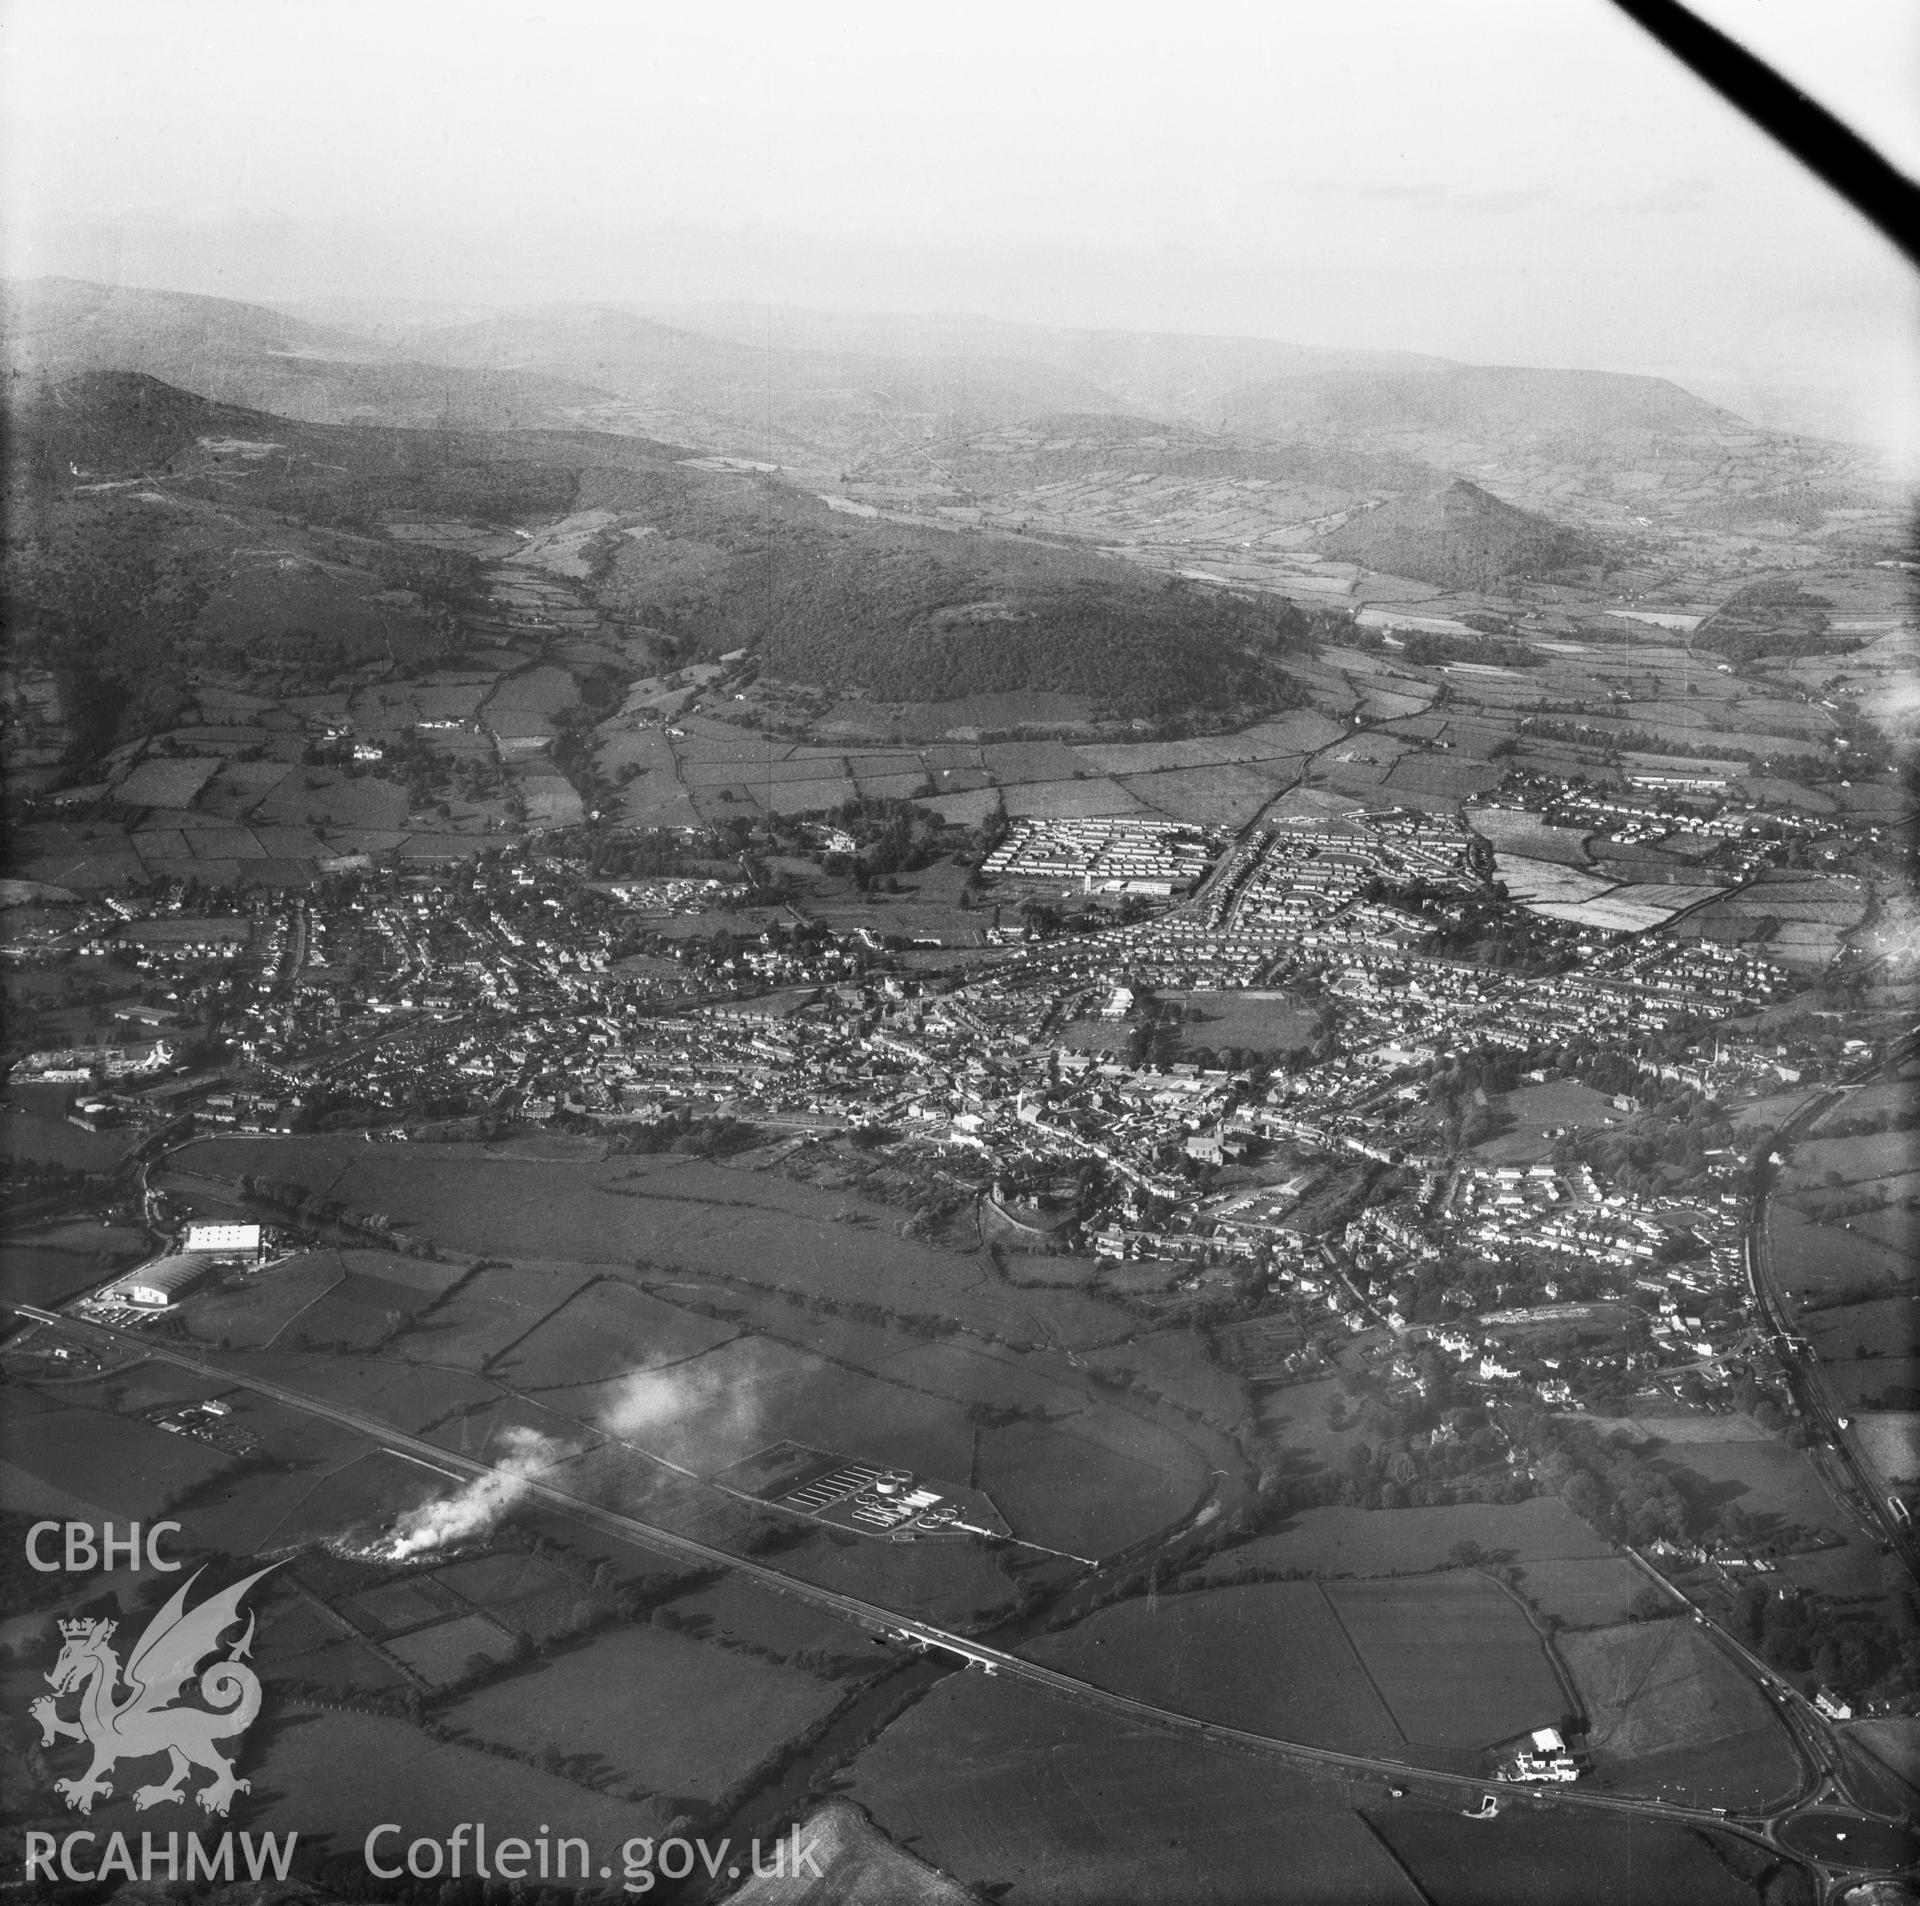 Black and white oblique aerial photograph showing Abergavenny, from Aerofilms album Monmouth A-Ce (444), taken by Aerofilms Ltd and dated 1963.